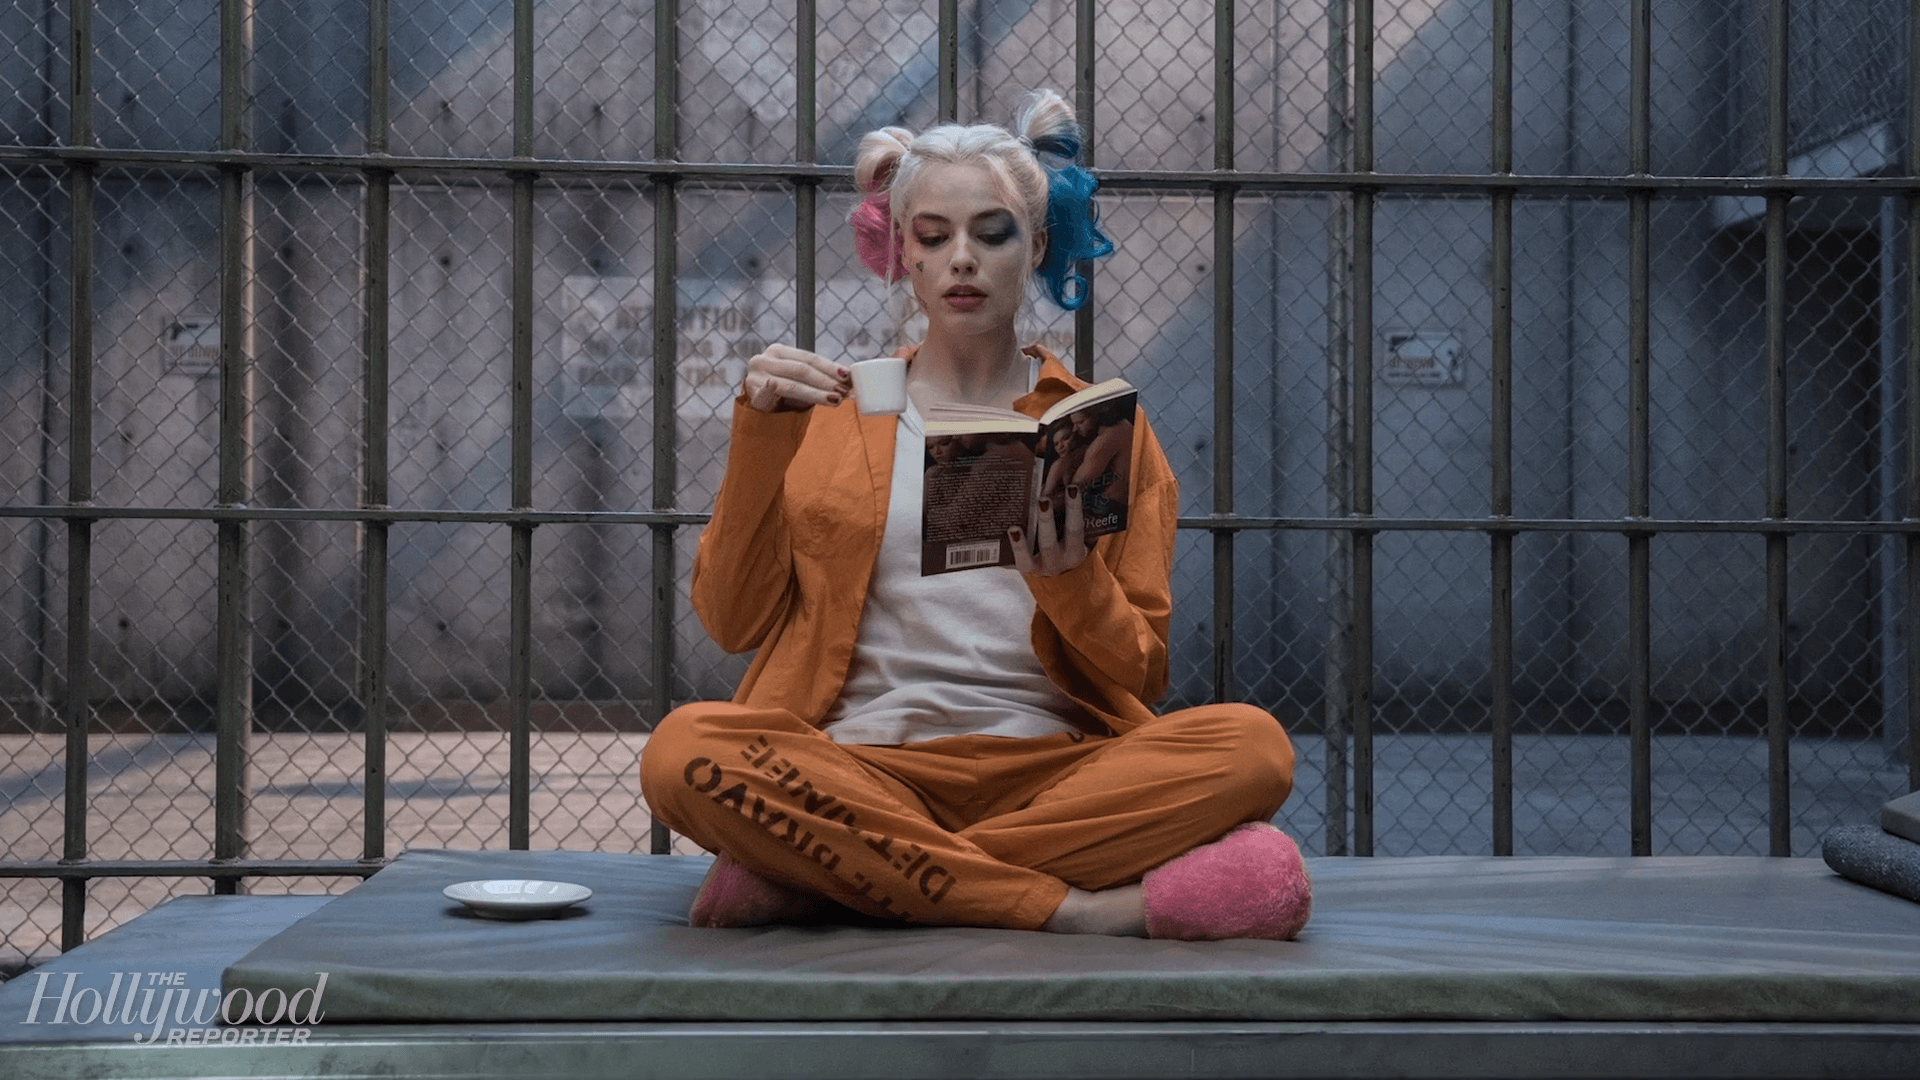 Birds of Prey' Movie Release Date Set for 2020. Hollywood